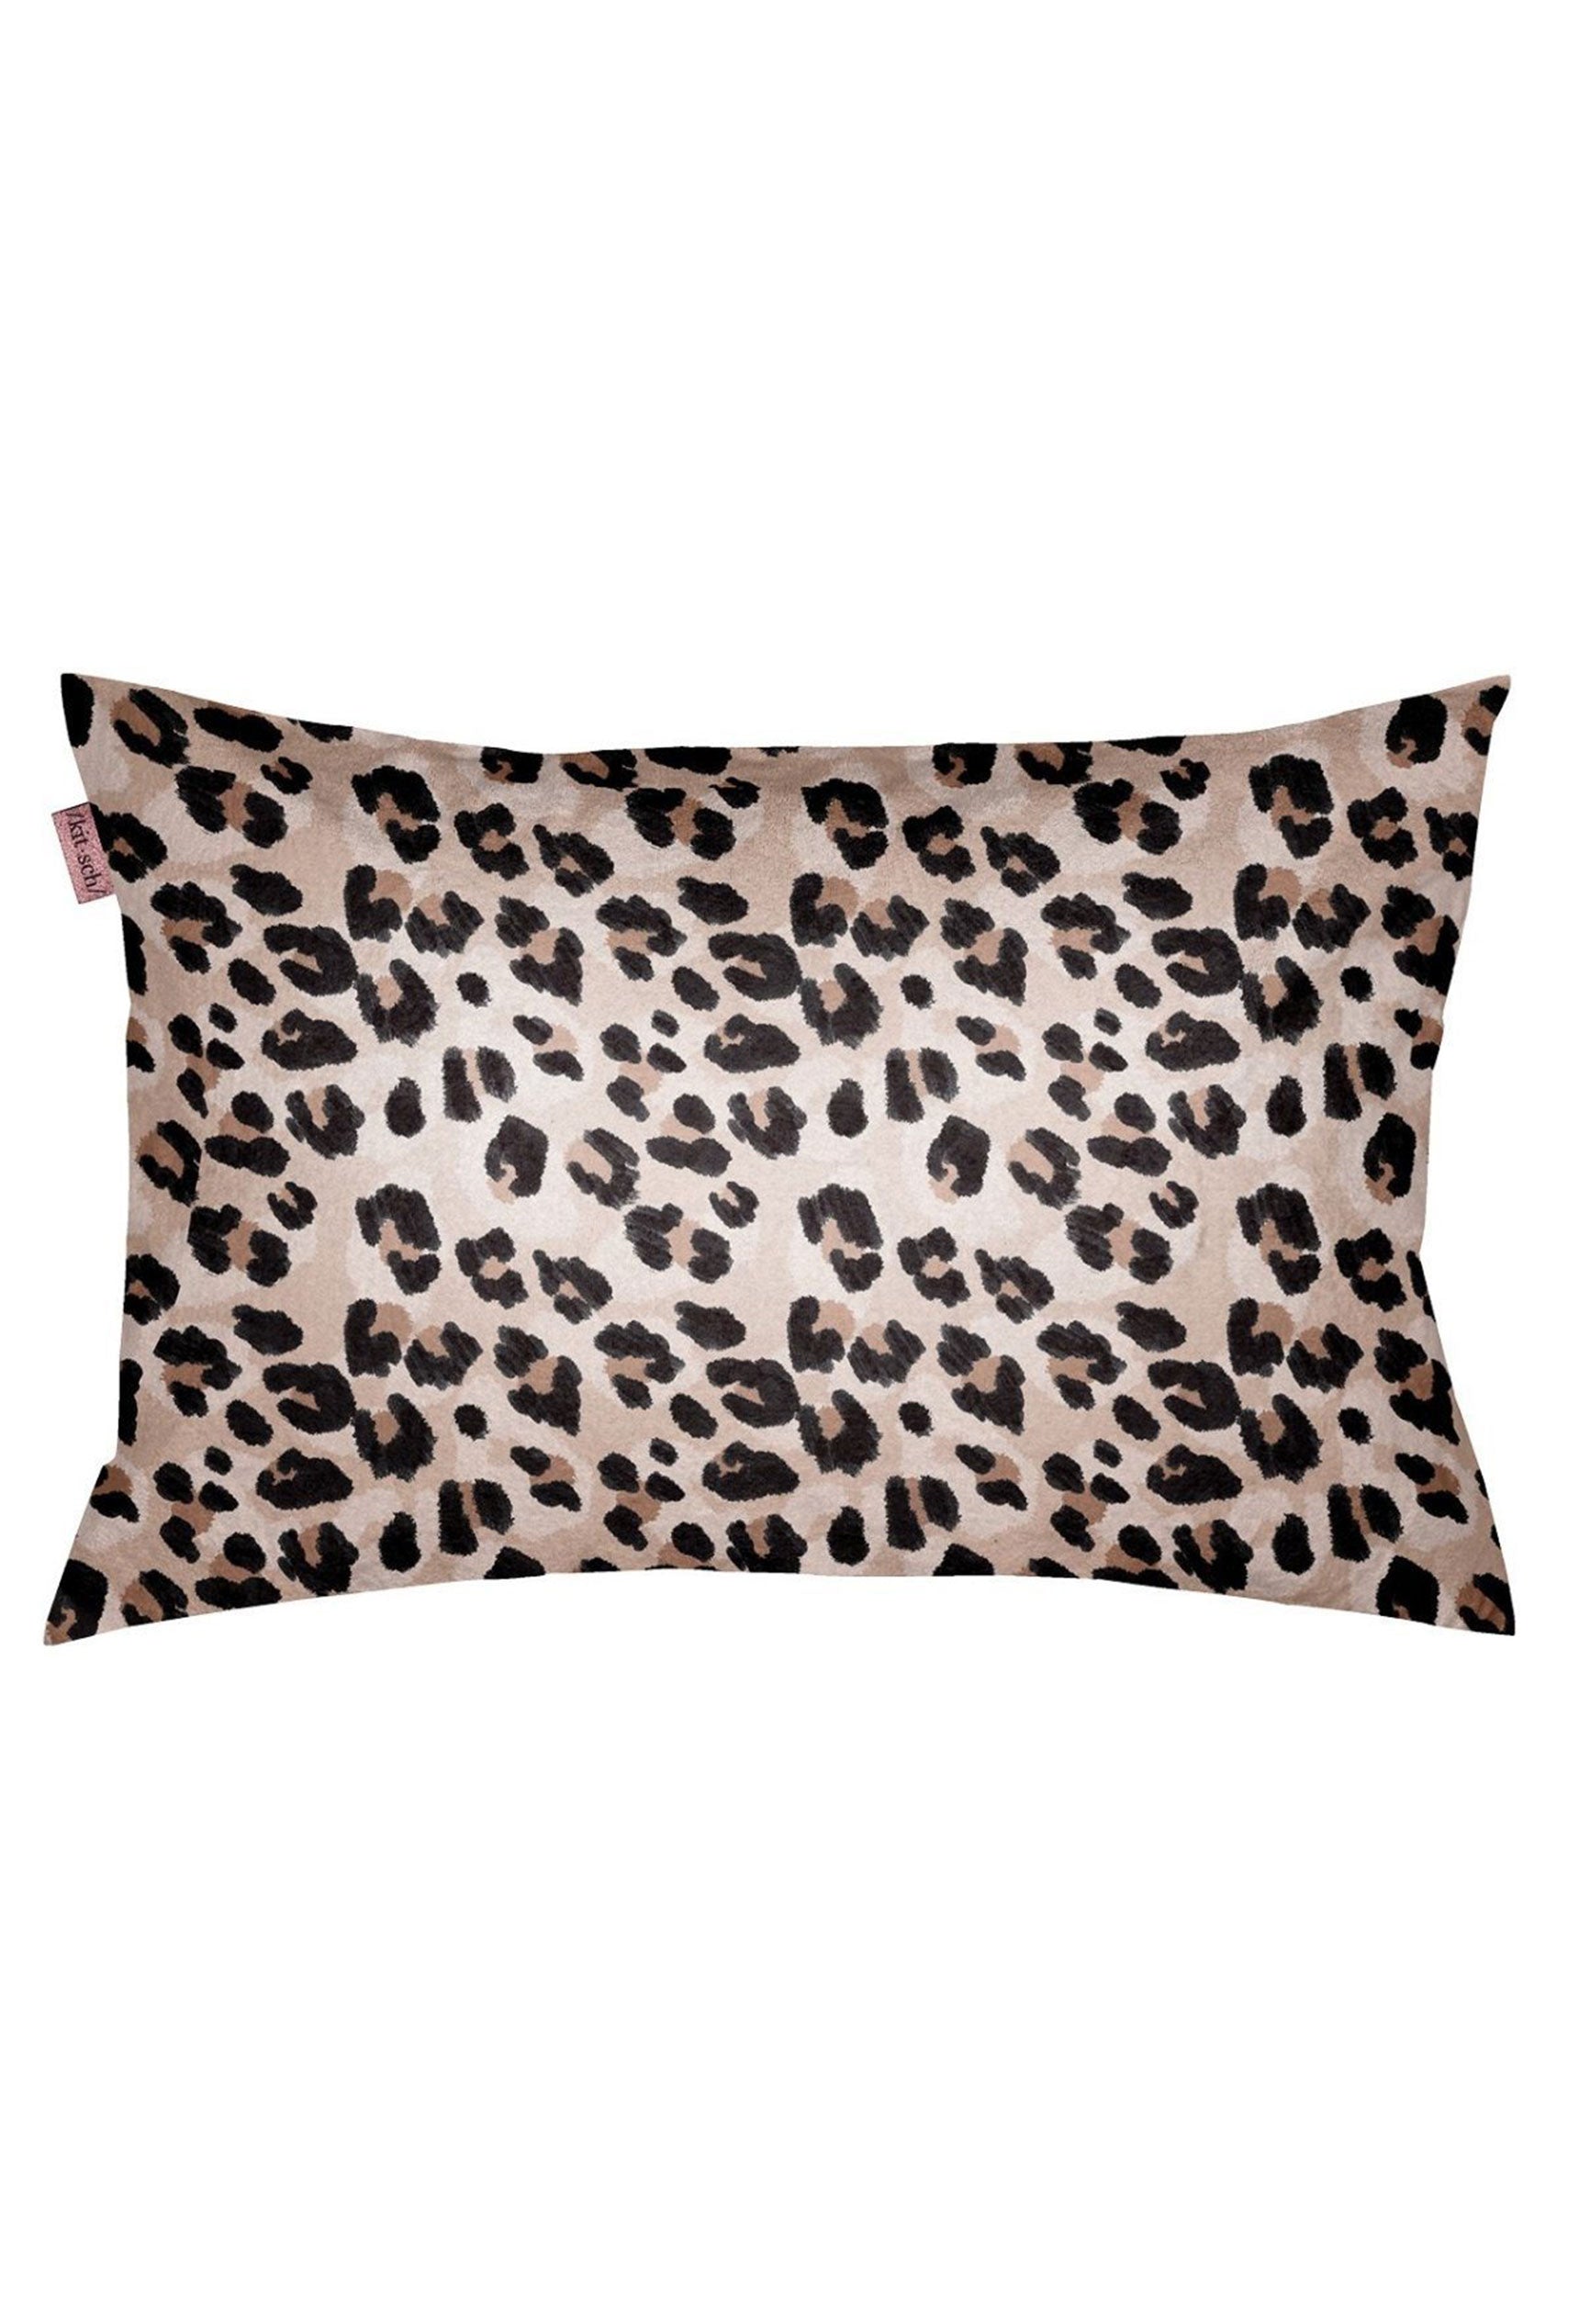 Kitsch Towel Pillow Cover in Leopard, leopard towel fabric pillowcase 